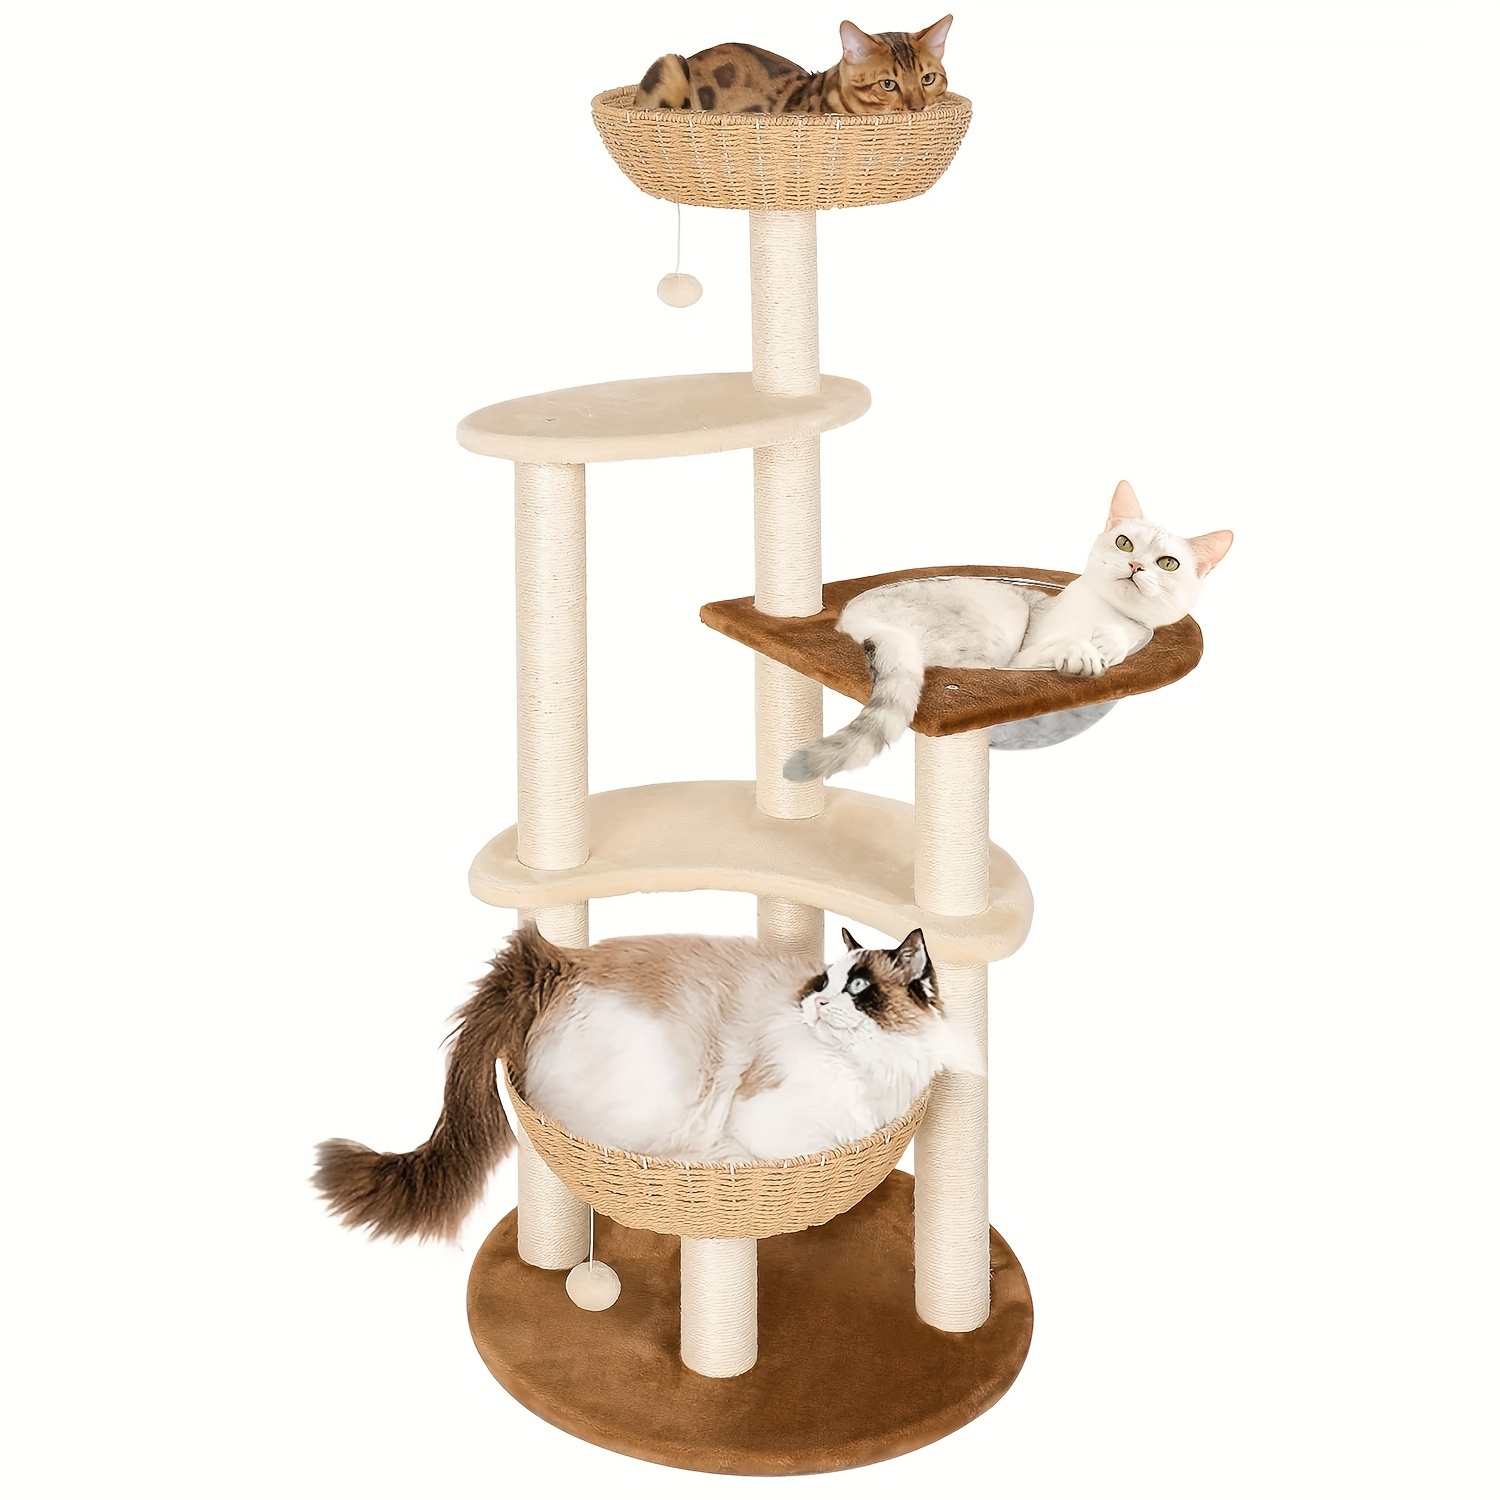 

Modern Cat Tower Tree For Large Cats 25ibs, 55 Inch Cute Boho Cat Tower Tall With 2 Handwoven Cat Basket Beds & Space Capsule, Unique Rattan Wicker Adult Cat Tower Tree For Multiple Cats